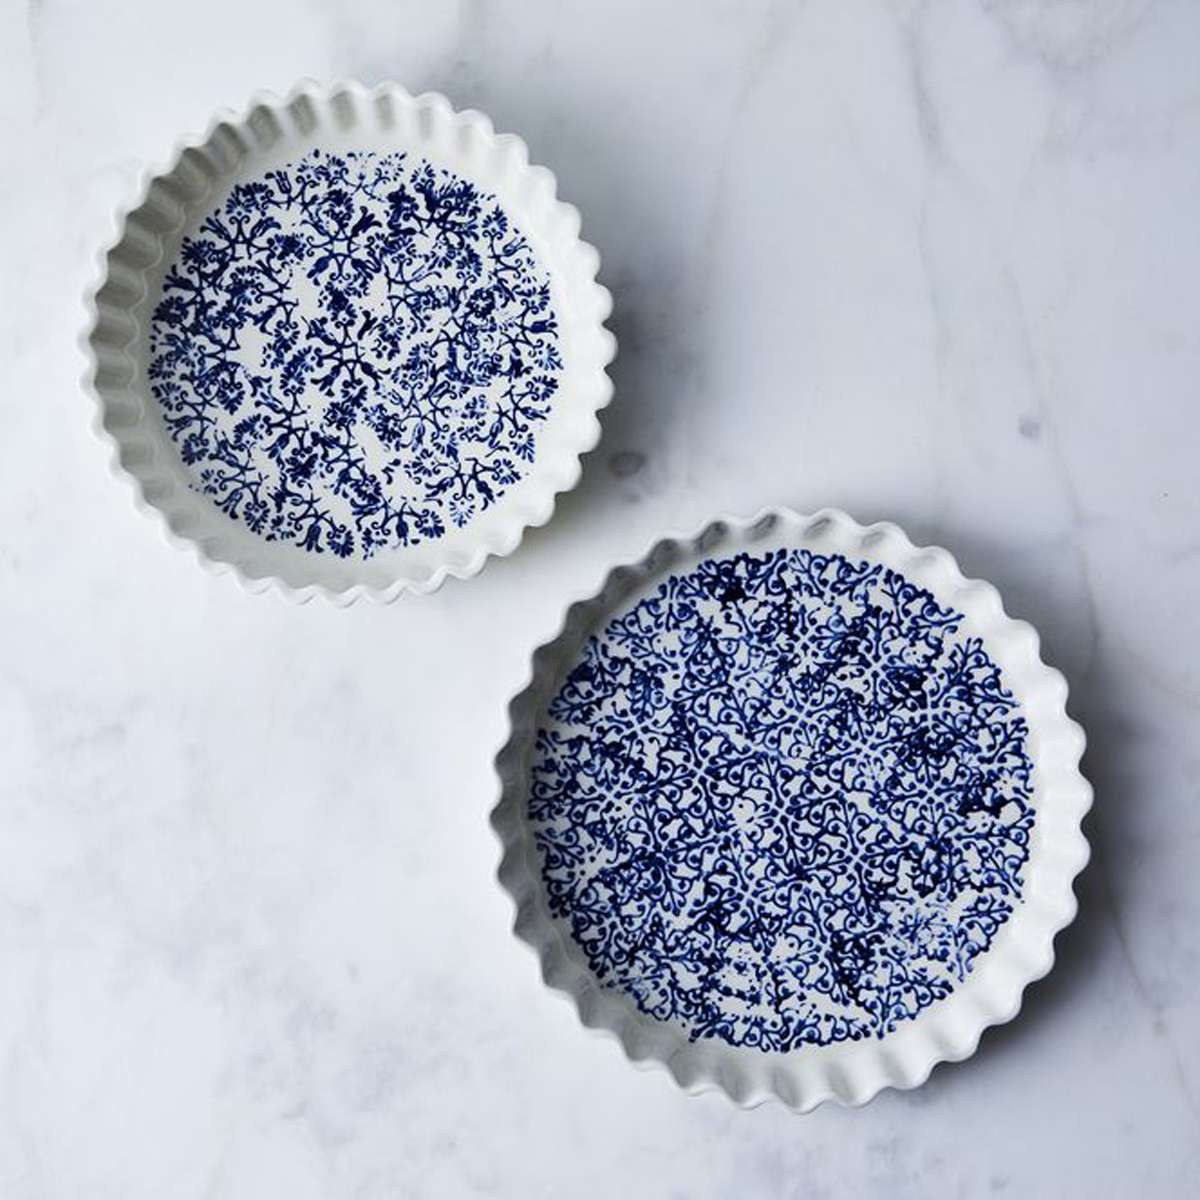 <p>If you’re going to work hard on a beautiful pie, why not serve it in a beautiful dish? This stoneware piece is oven safe up to 450-degrees Fahrenheit, and can serve as an heirloom in itself (even get the measuring cups and spoons to match). $75 at food52.com</p>